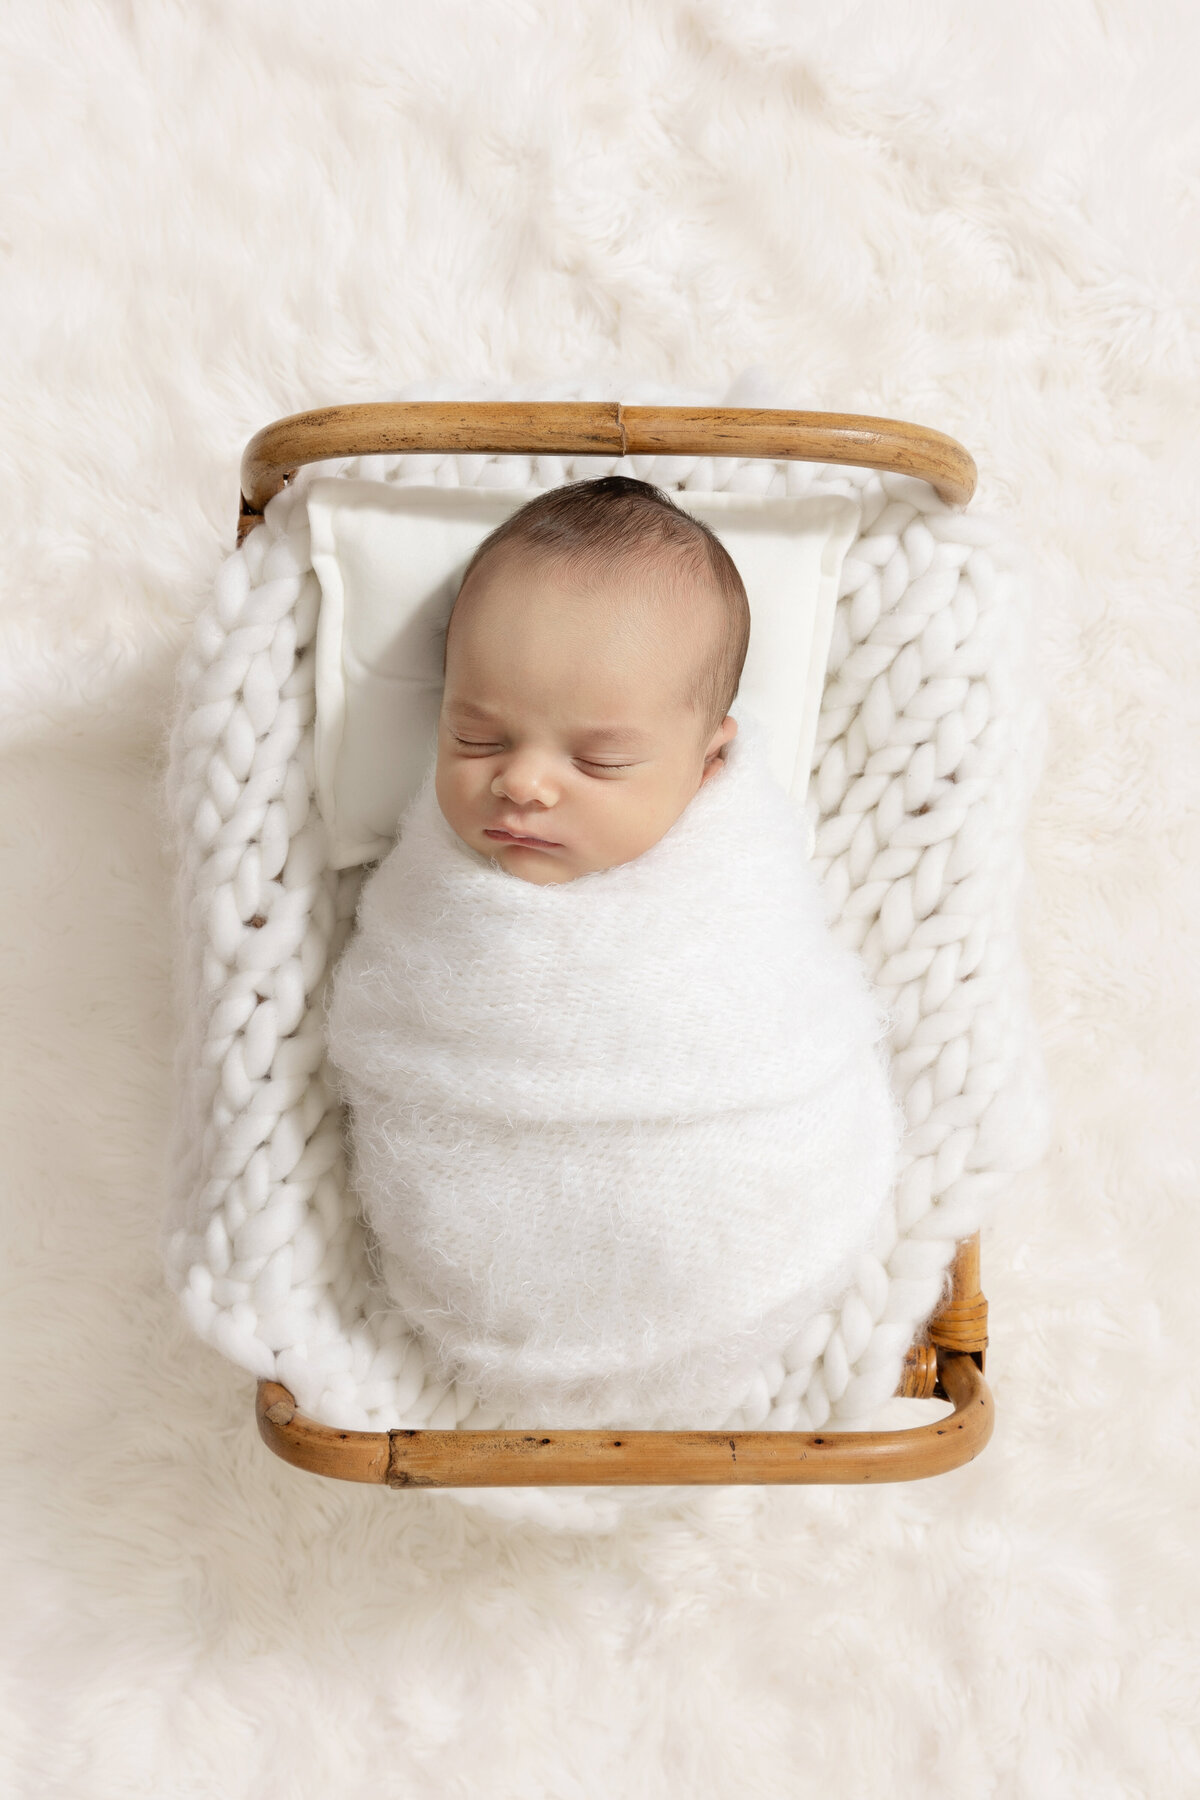 A look down at a newborn baby sleeping in a white swaddle in a wicker crib